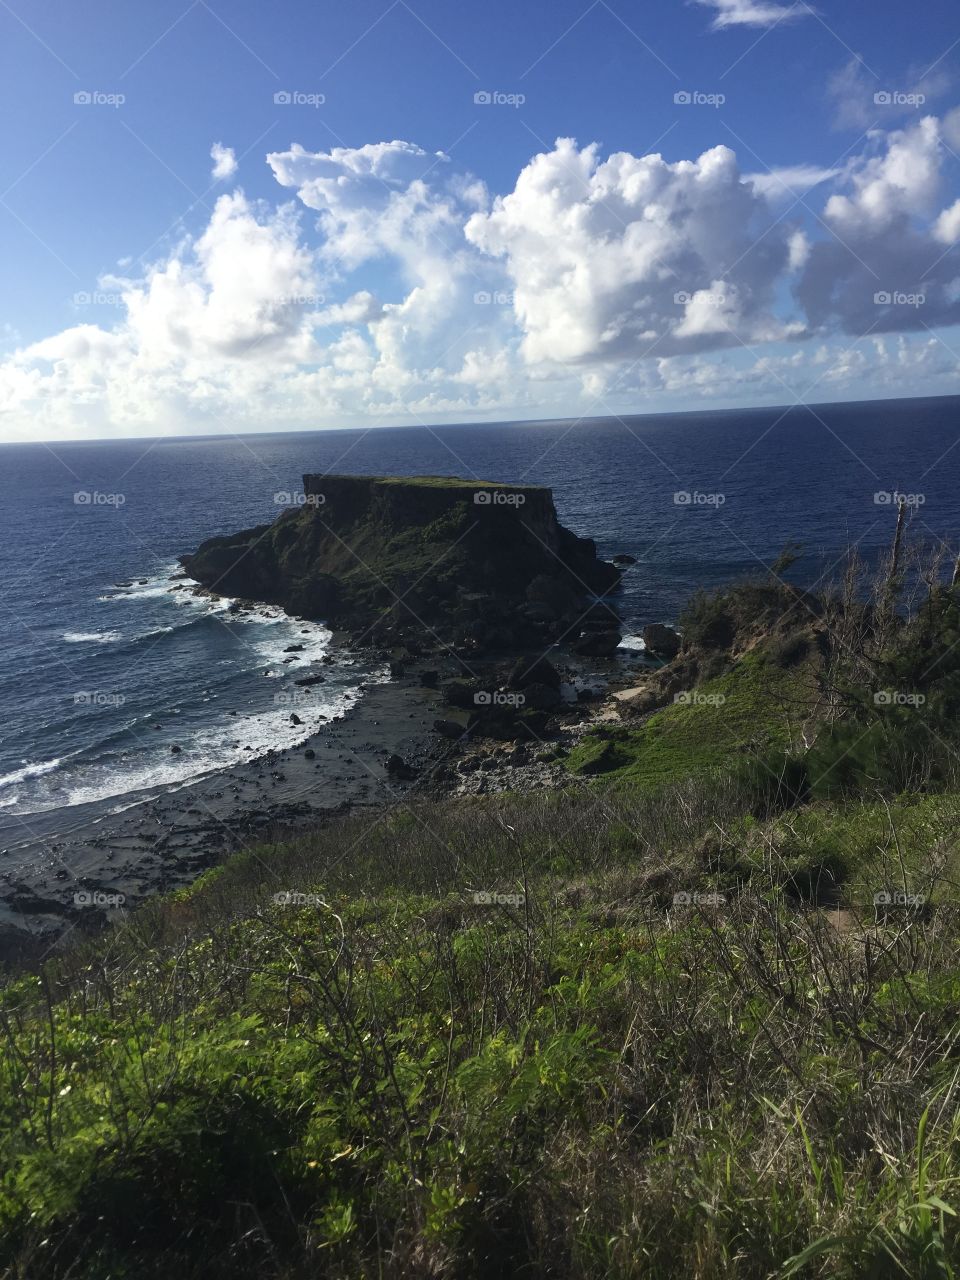 View of the cliffs below the Forbidden Island outlook, including Forbidden Island - located on Saipan. 